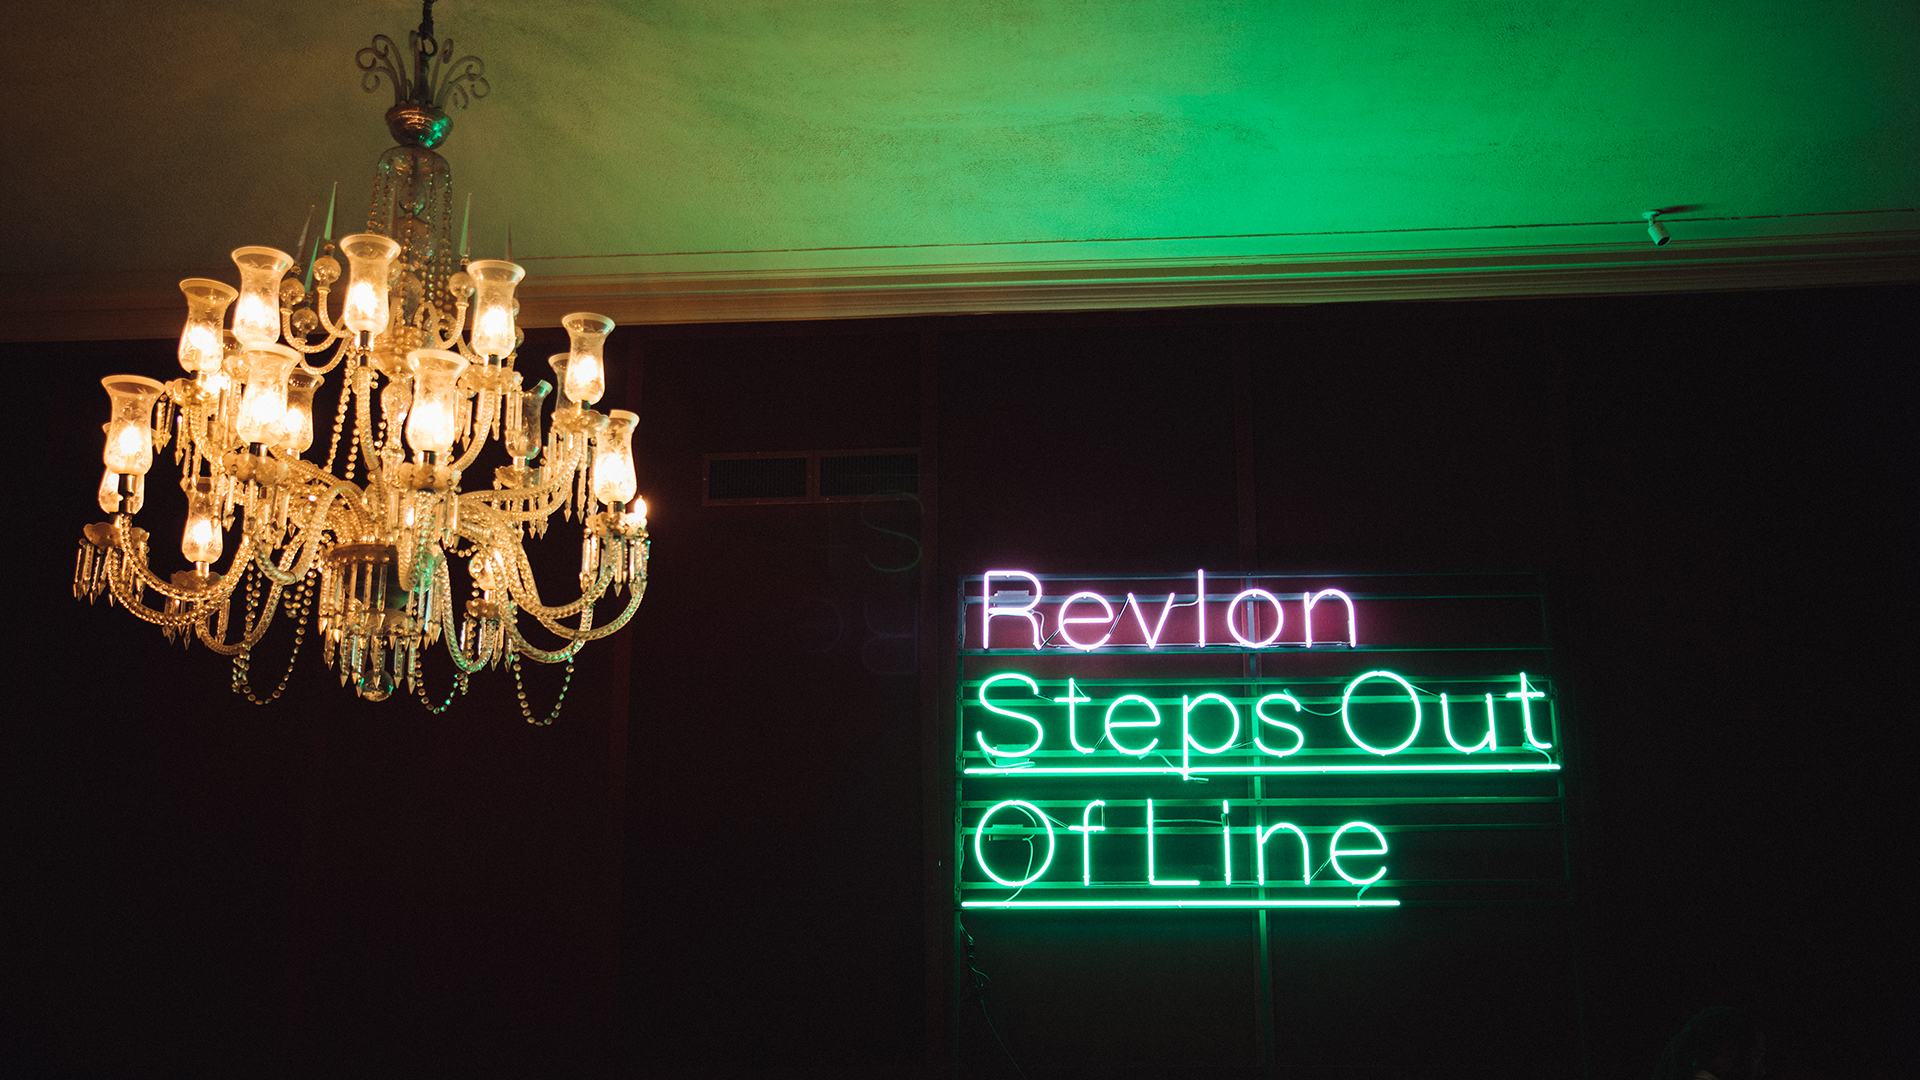 revlon-event-ferg-and-mette-towley-step-out-of-line